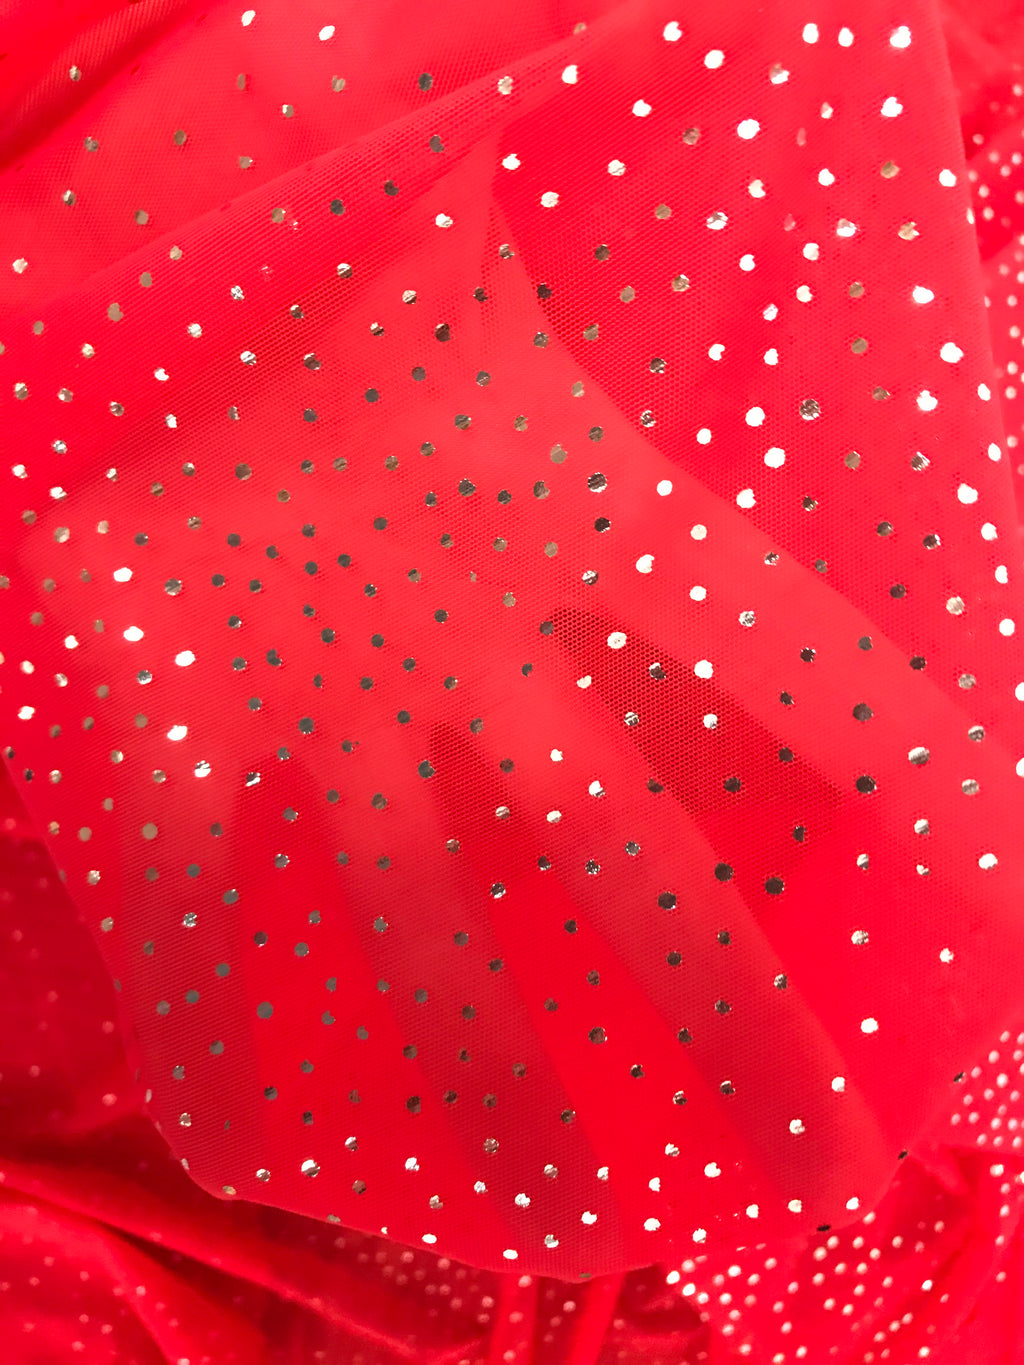 Red with Silver Sparkles - Fabric